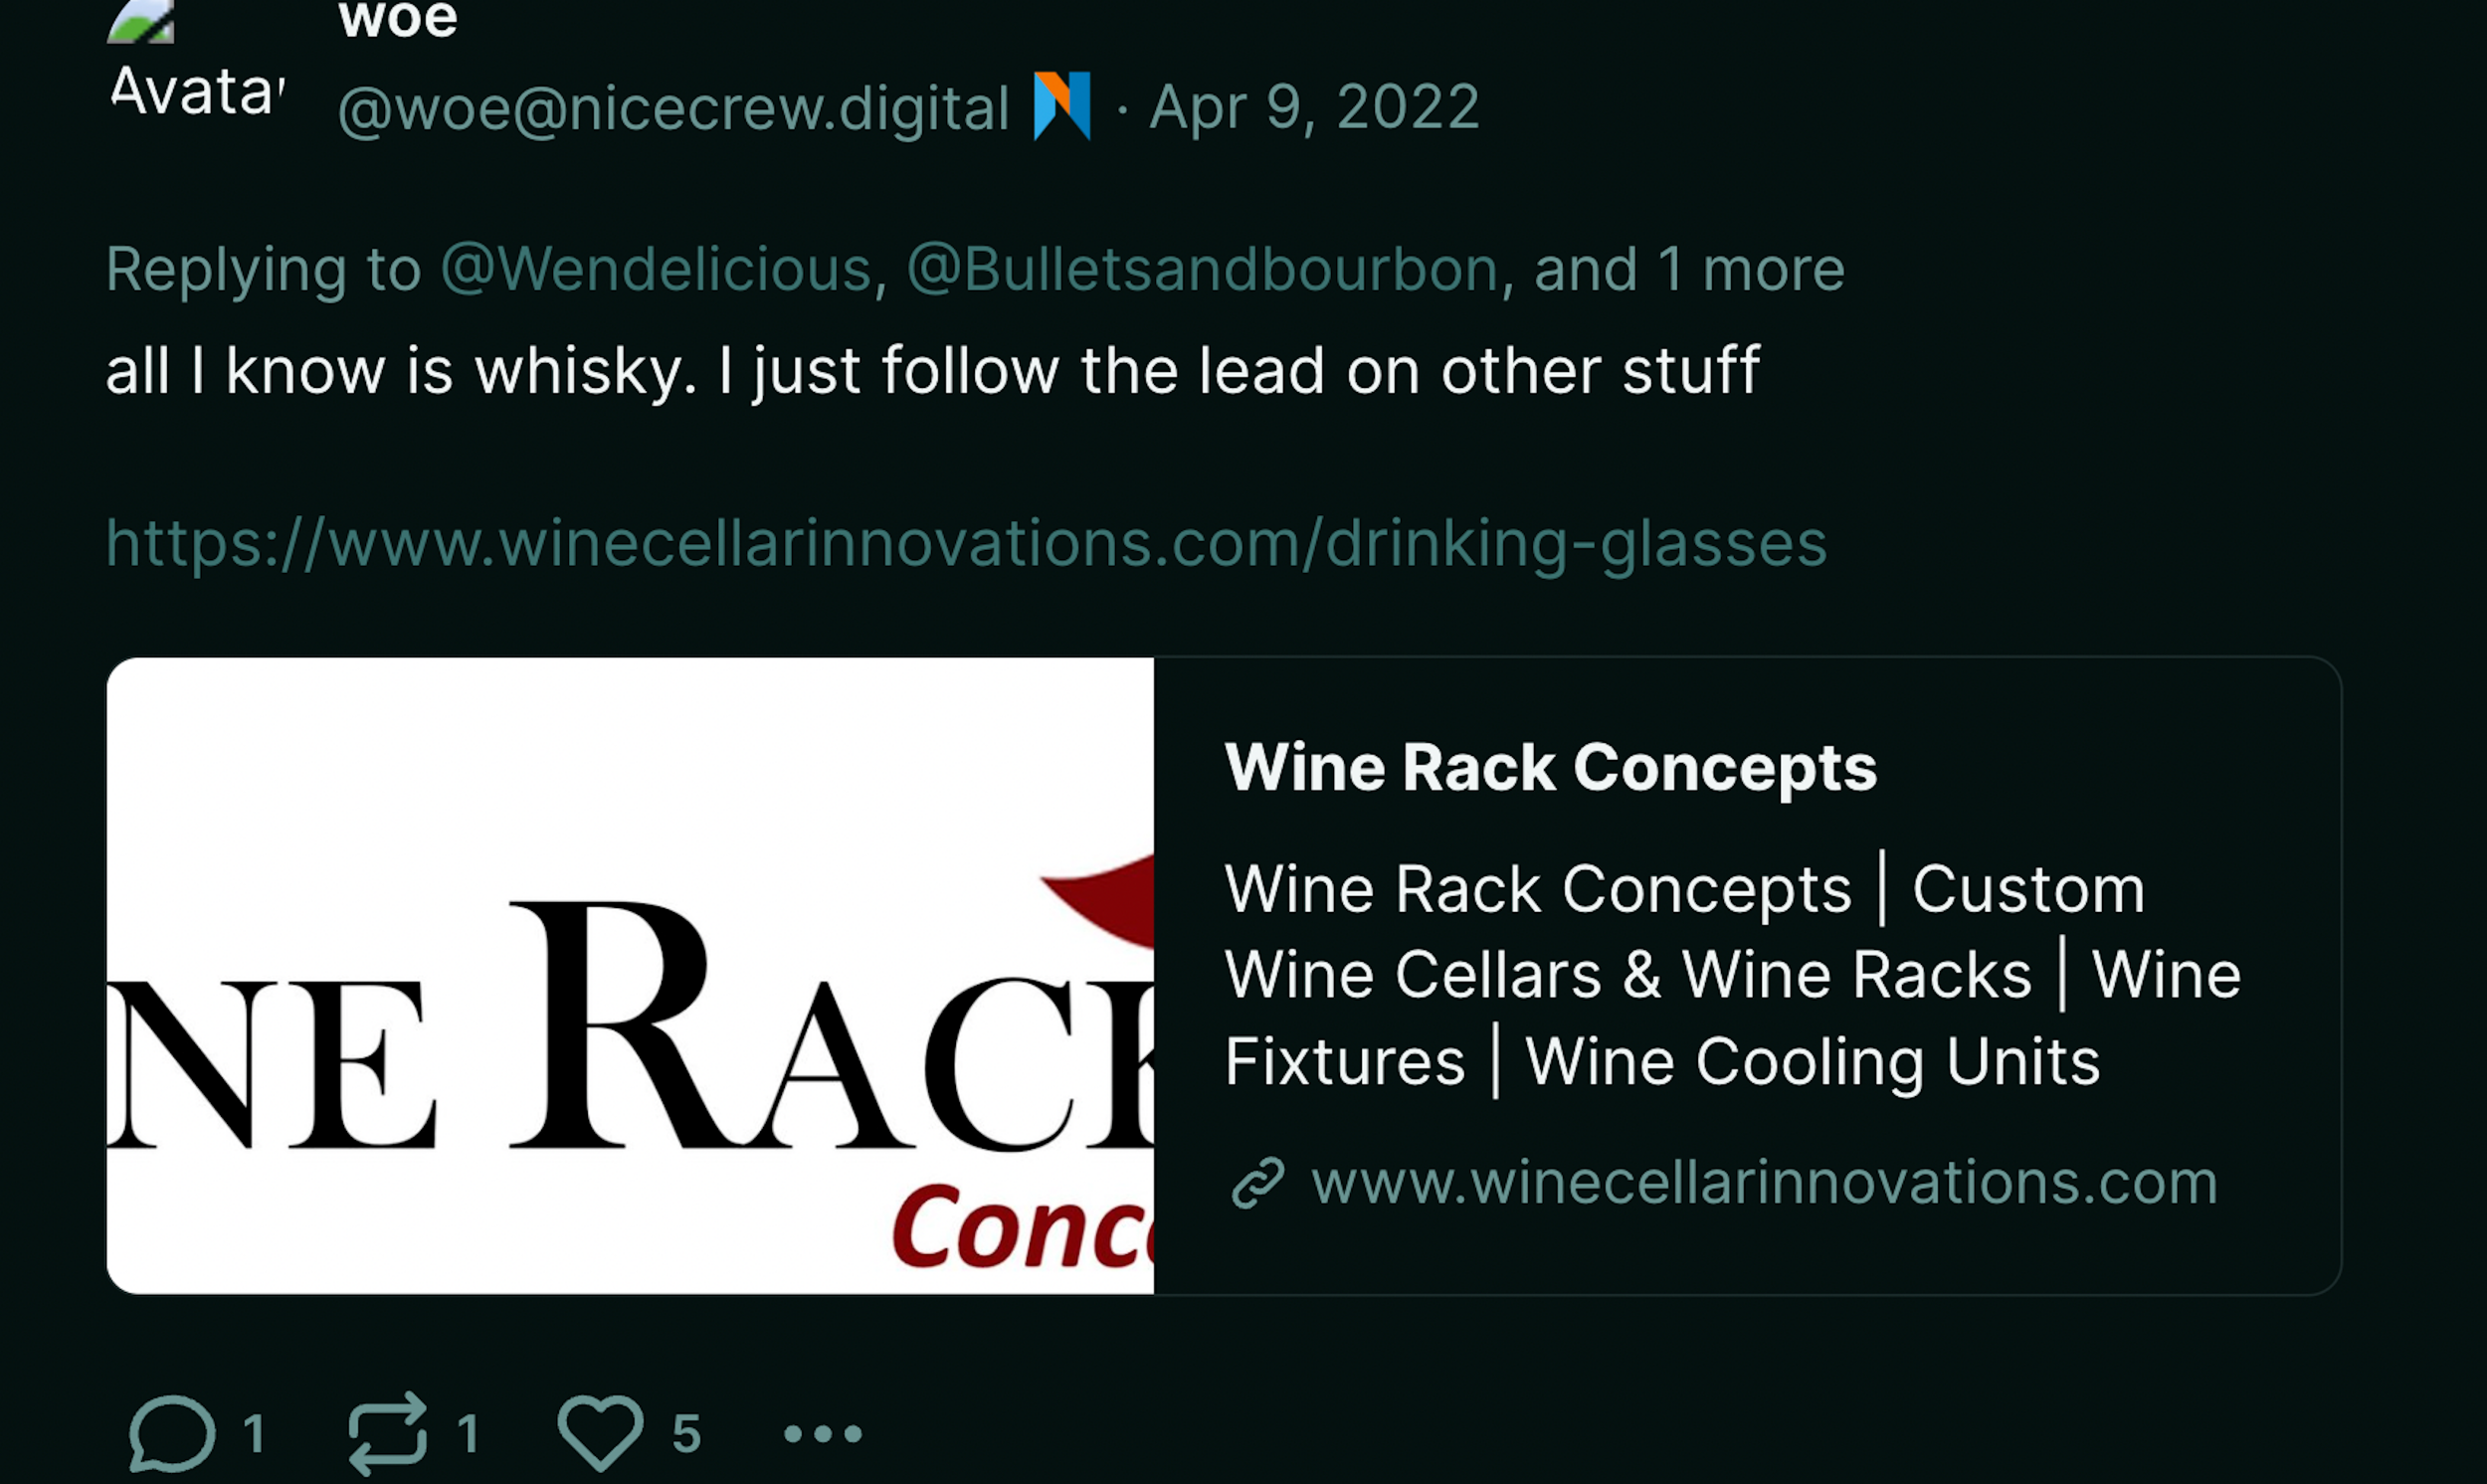 Dumperth on Poast: "all I know is whisky. I just follow the lead on other stuff." Link is to a site called Wine Cellar Innovations.